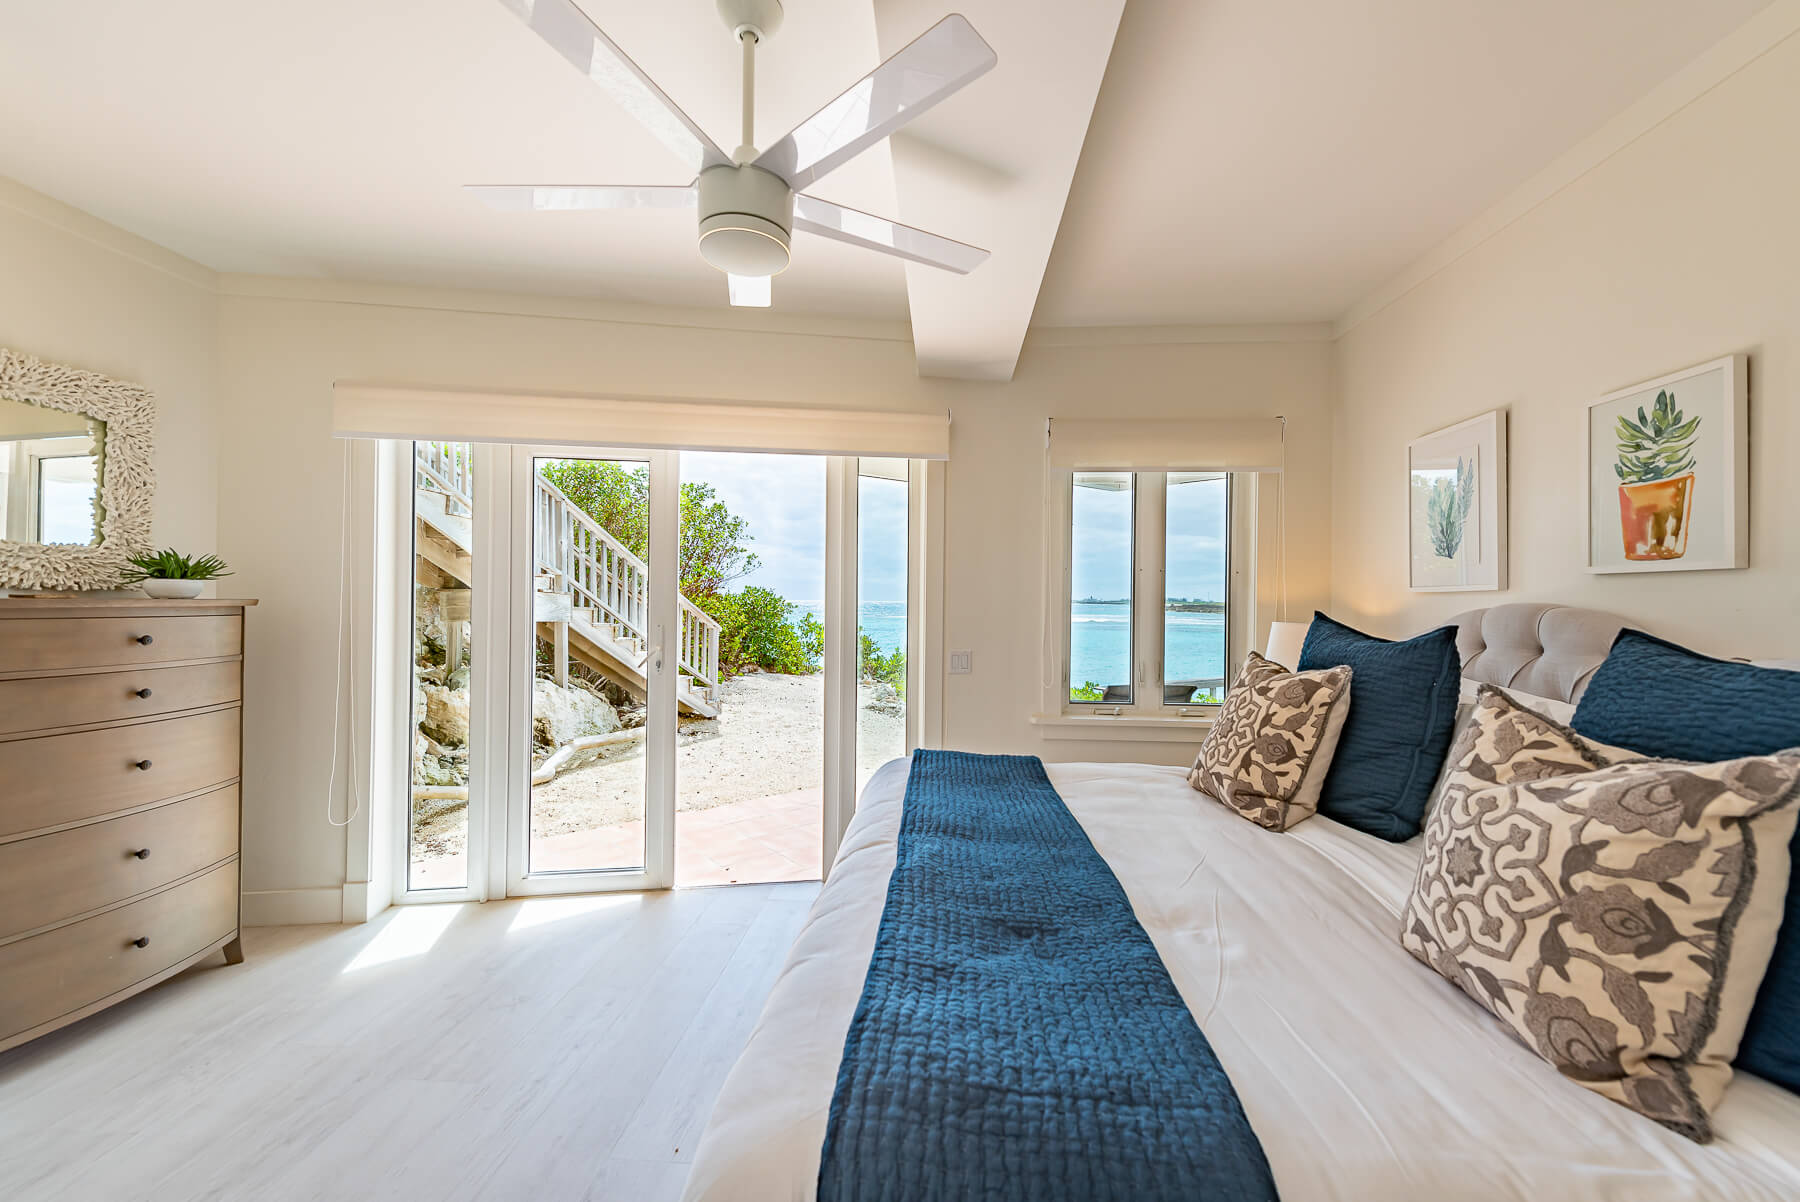 Elegant beachfront villa bedroom at The Abaco Club with access to a natural balcony overlooking the Bahamian sea.